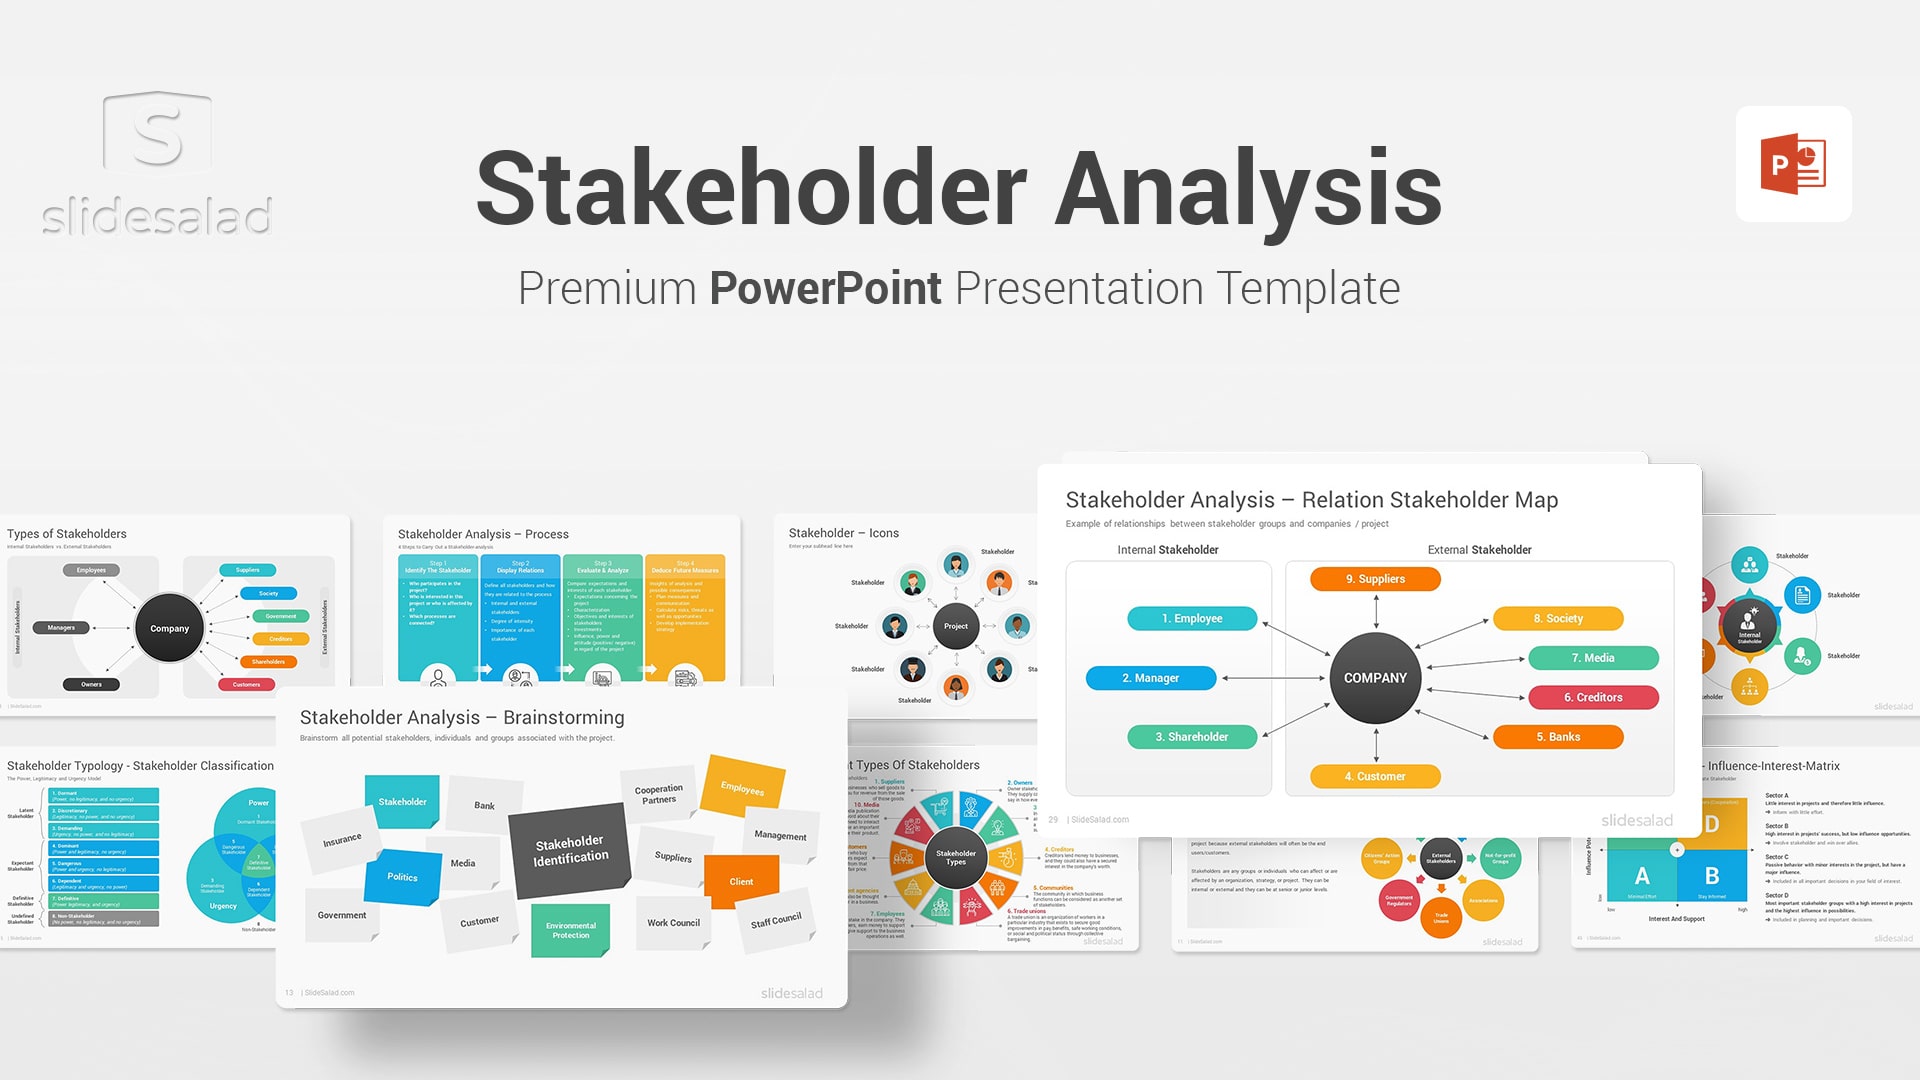 Stakeholder Analysis PowerPoint Templates - Best Change Management PPT Template for Investors and Stakeholders